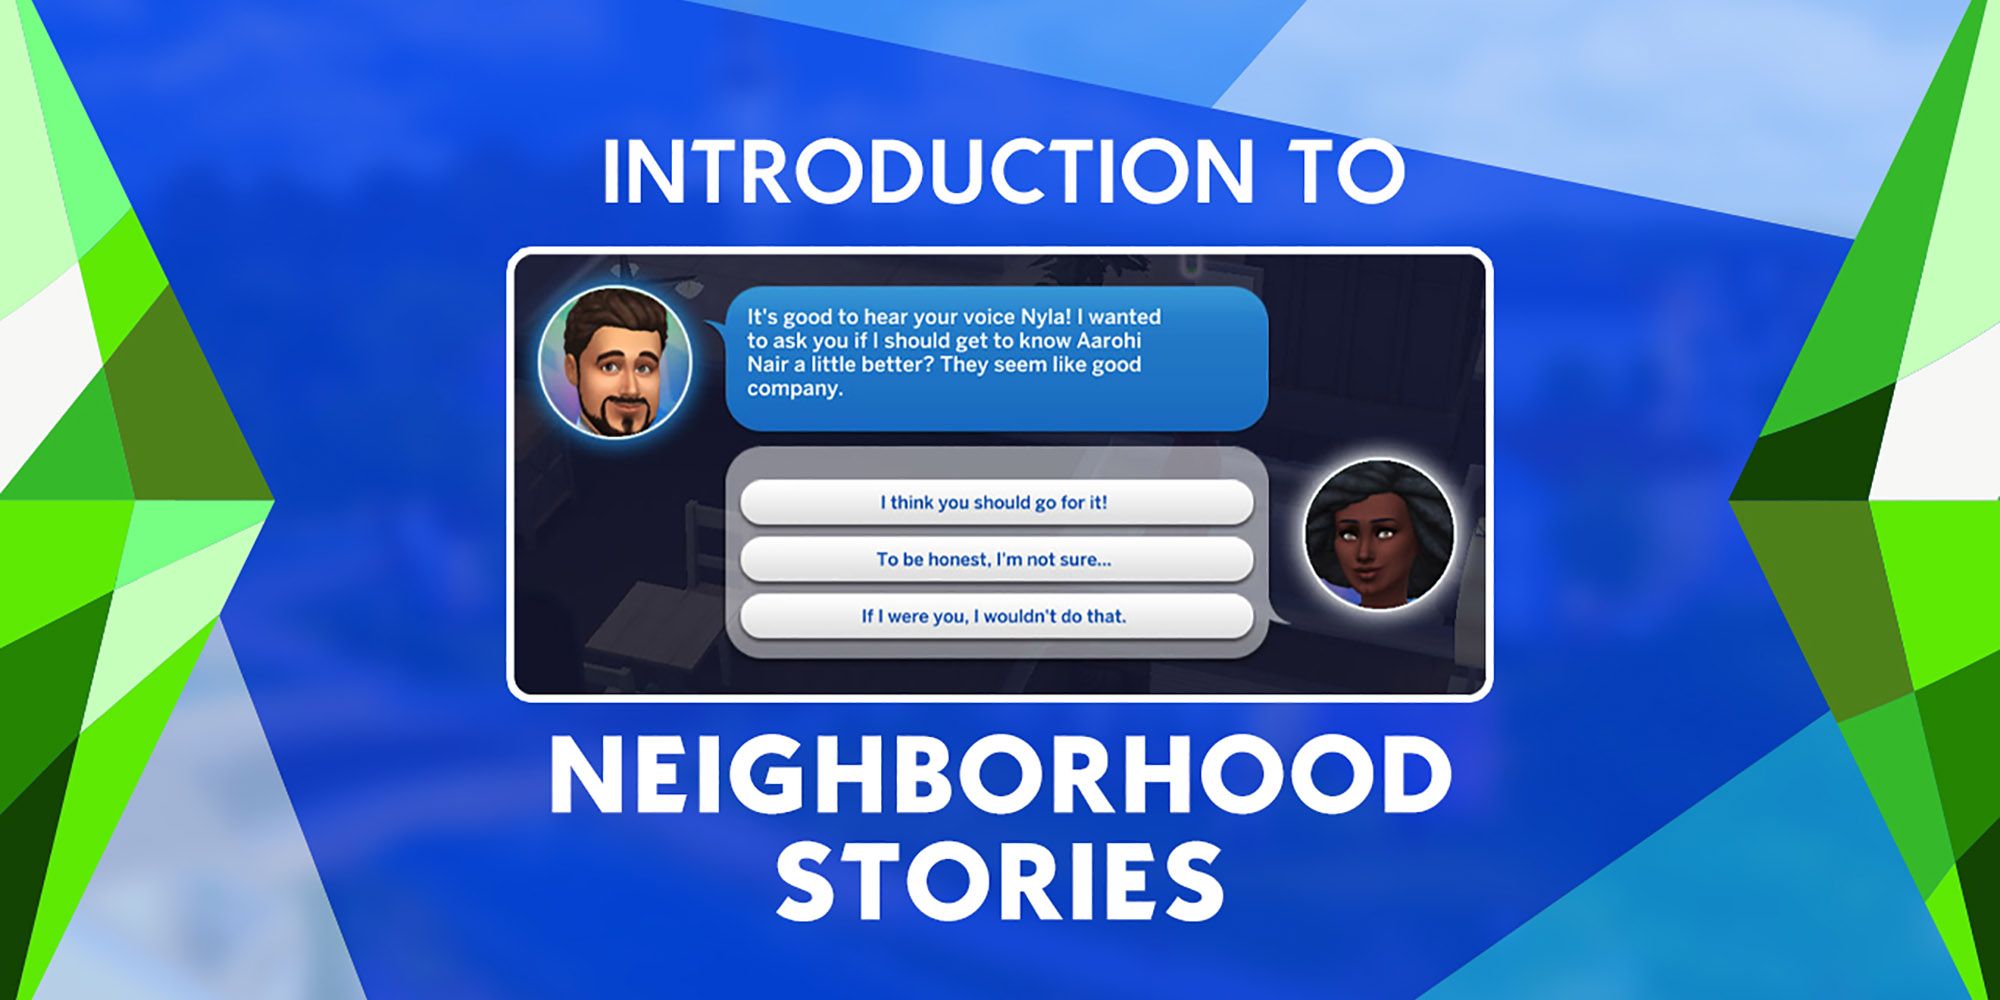 The Sims 4 Neighborhood Stories introduced